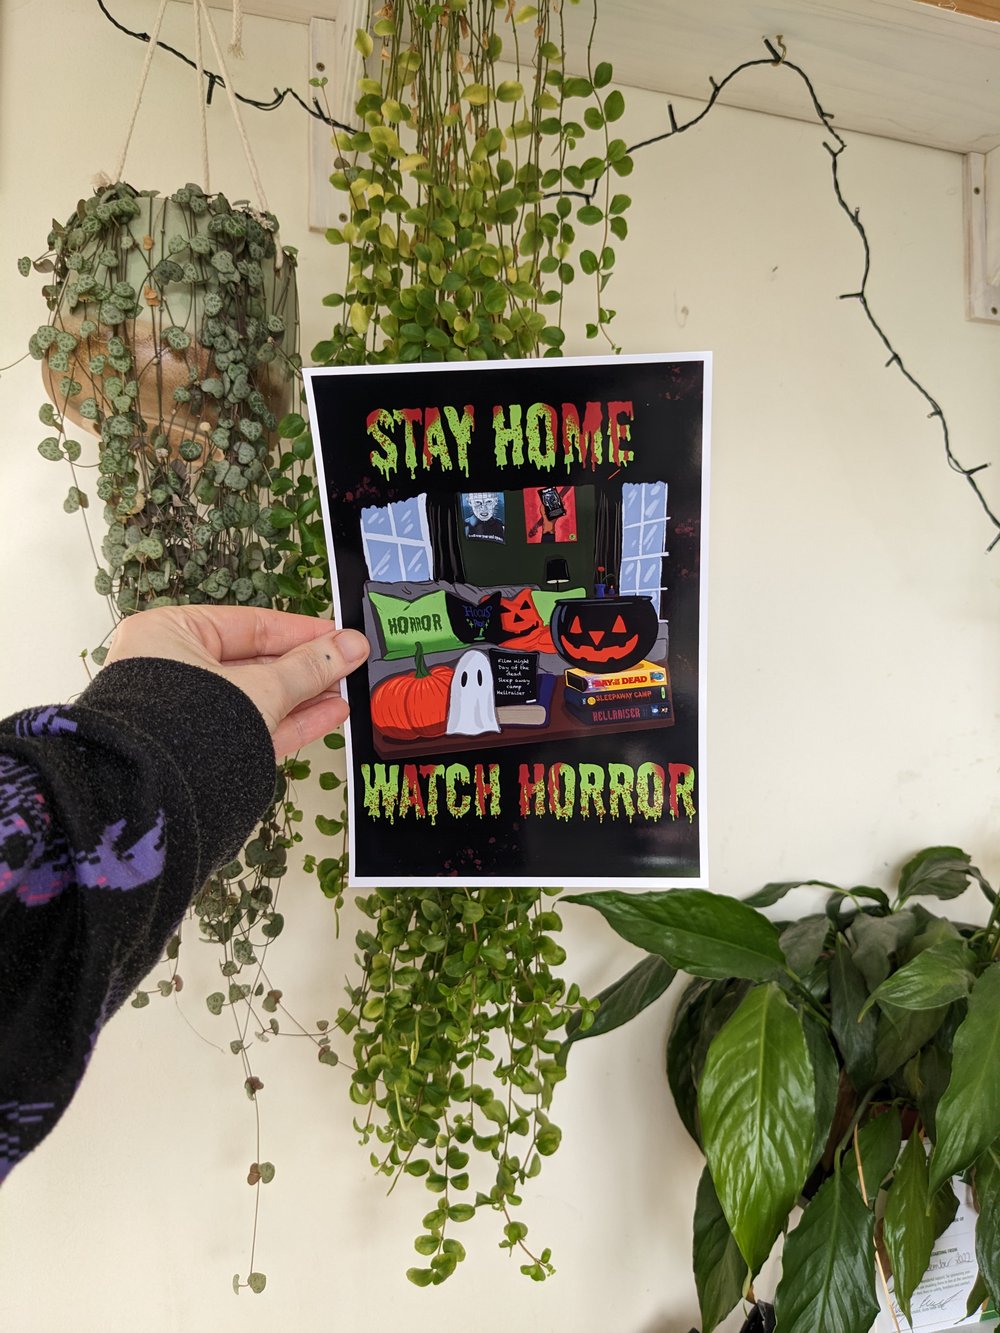 Stay Home Watch Horror Illustration